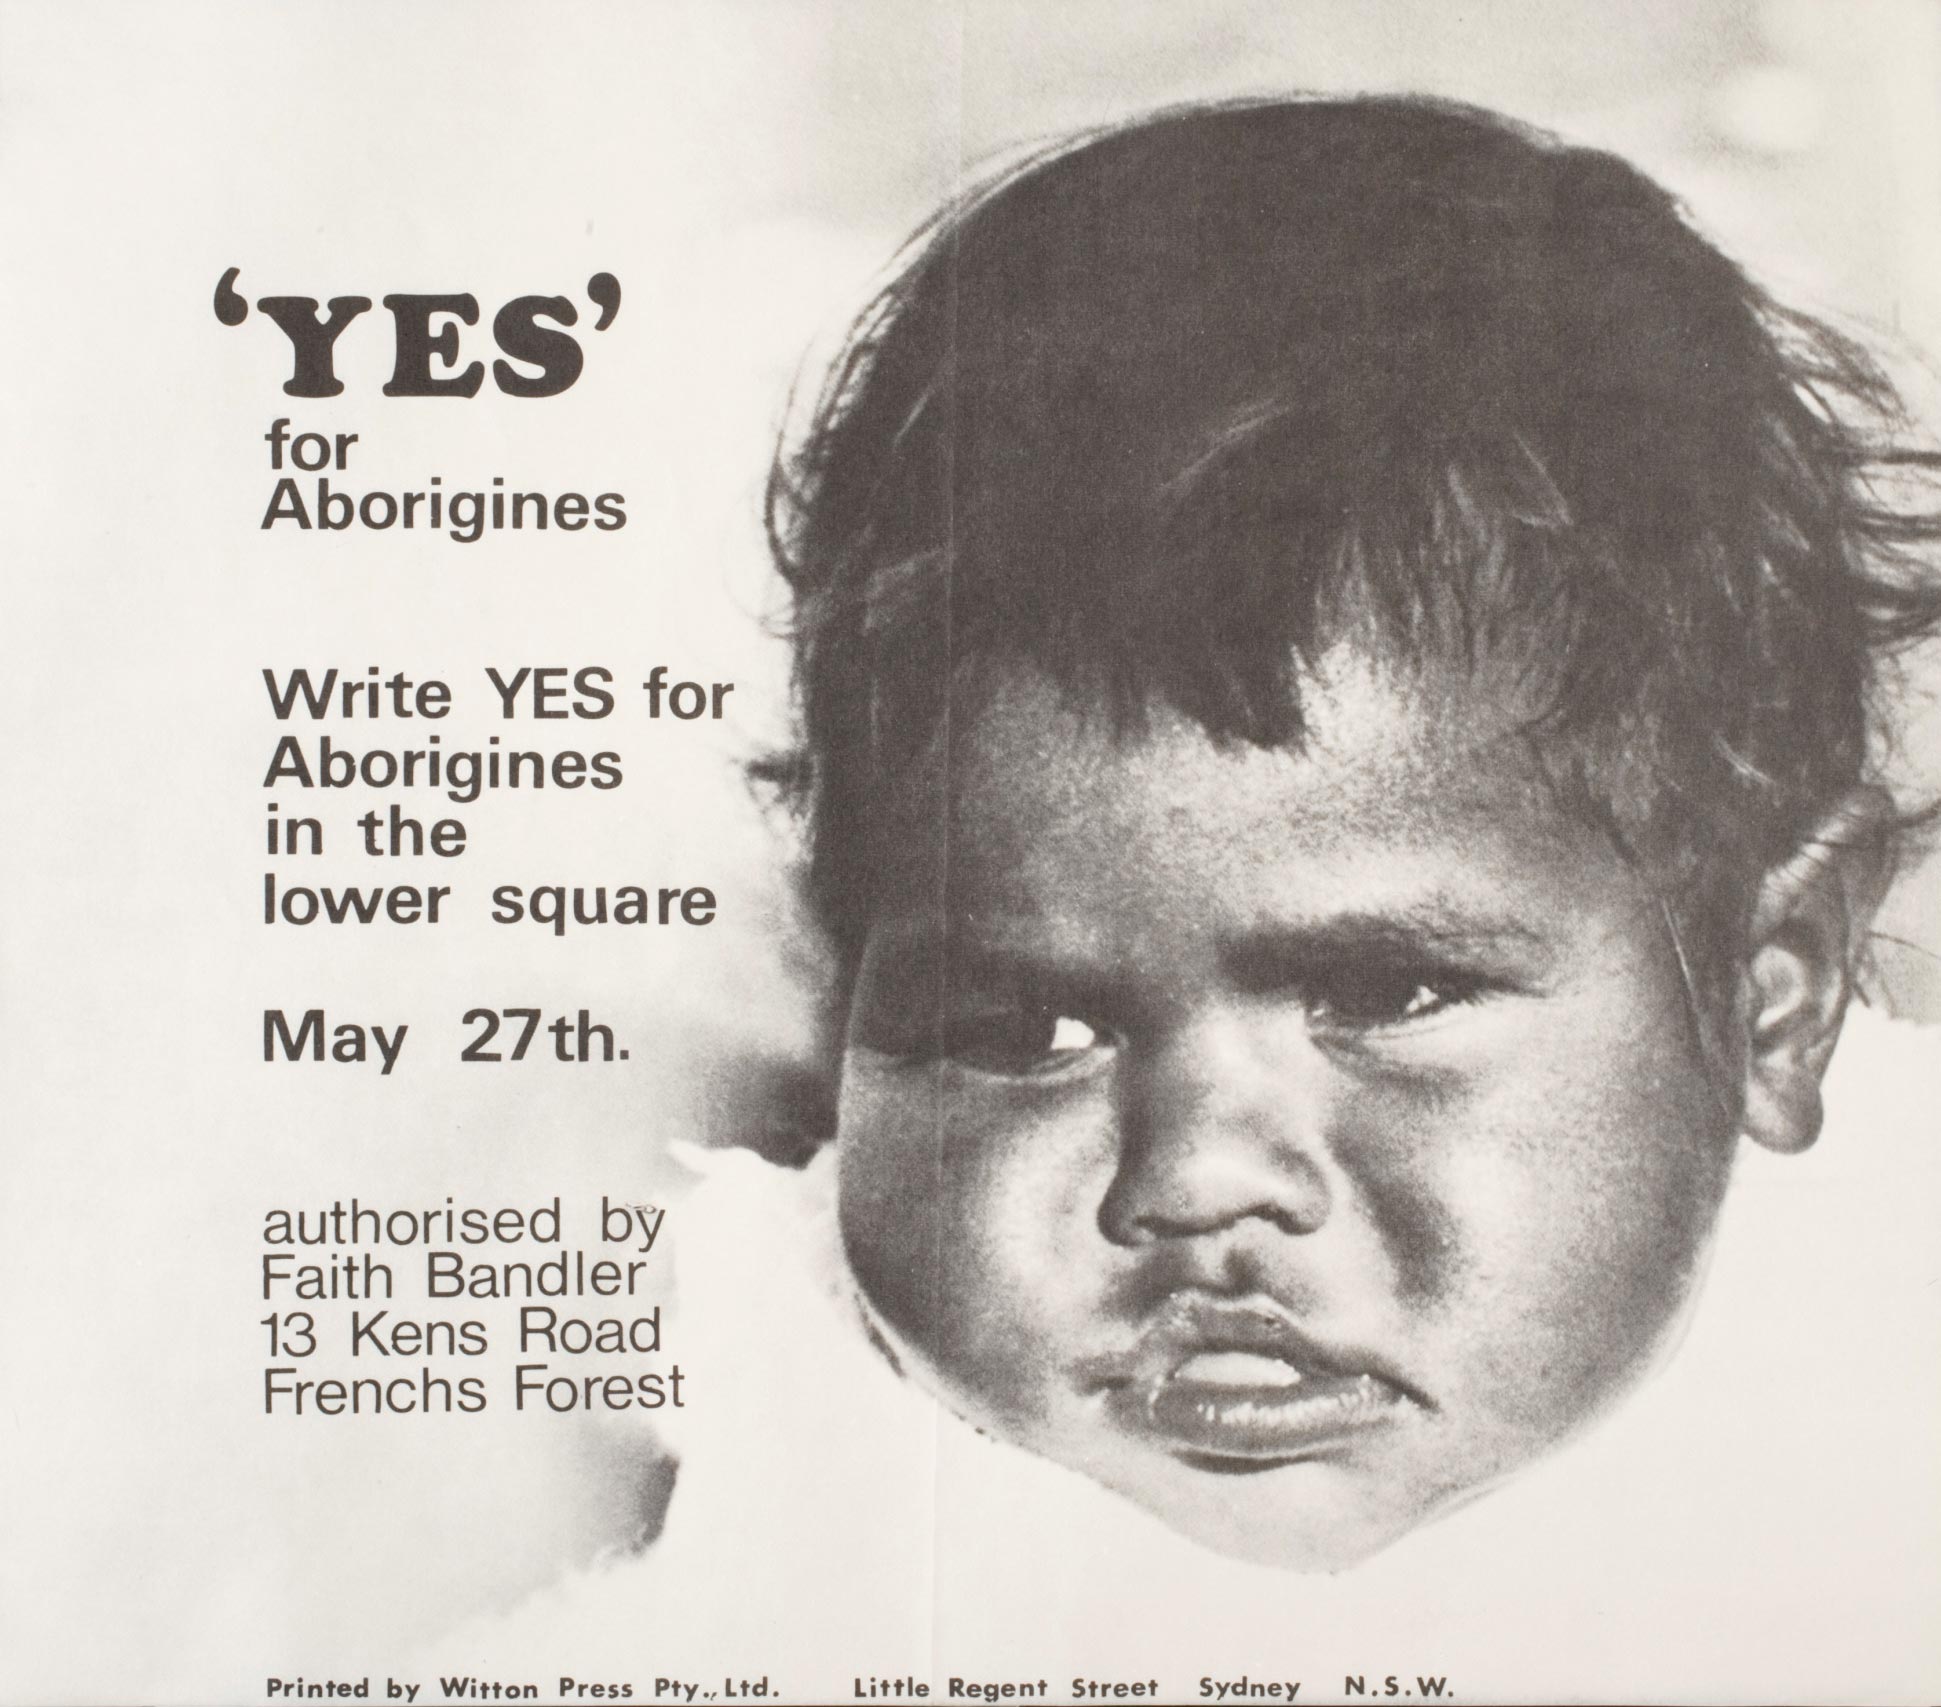 A black and white poster for the Yes campaign for the Federal Referendum on 27 May, 1967. It depicts a portrait photograph of an Aboriginal baby identified as Janelle Marshall. The text, 'YES / for / Aborigines / Write YES for / Aborigines / in the / lower square / May 27th. / authorised by / Faith Bandler / 13 Kens Road / Frenchs Forest', appears to the left of the portrait.